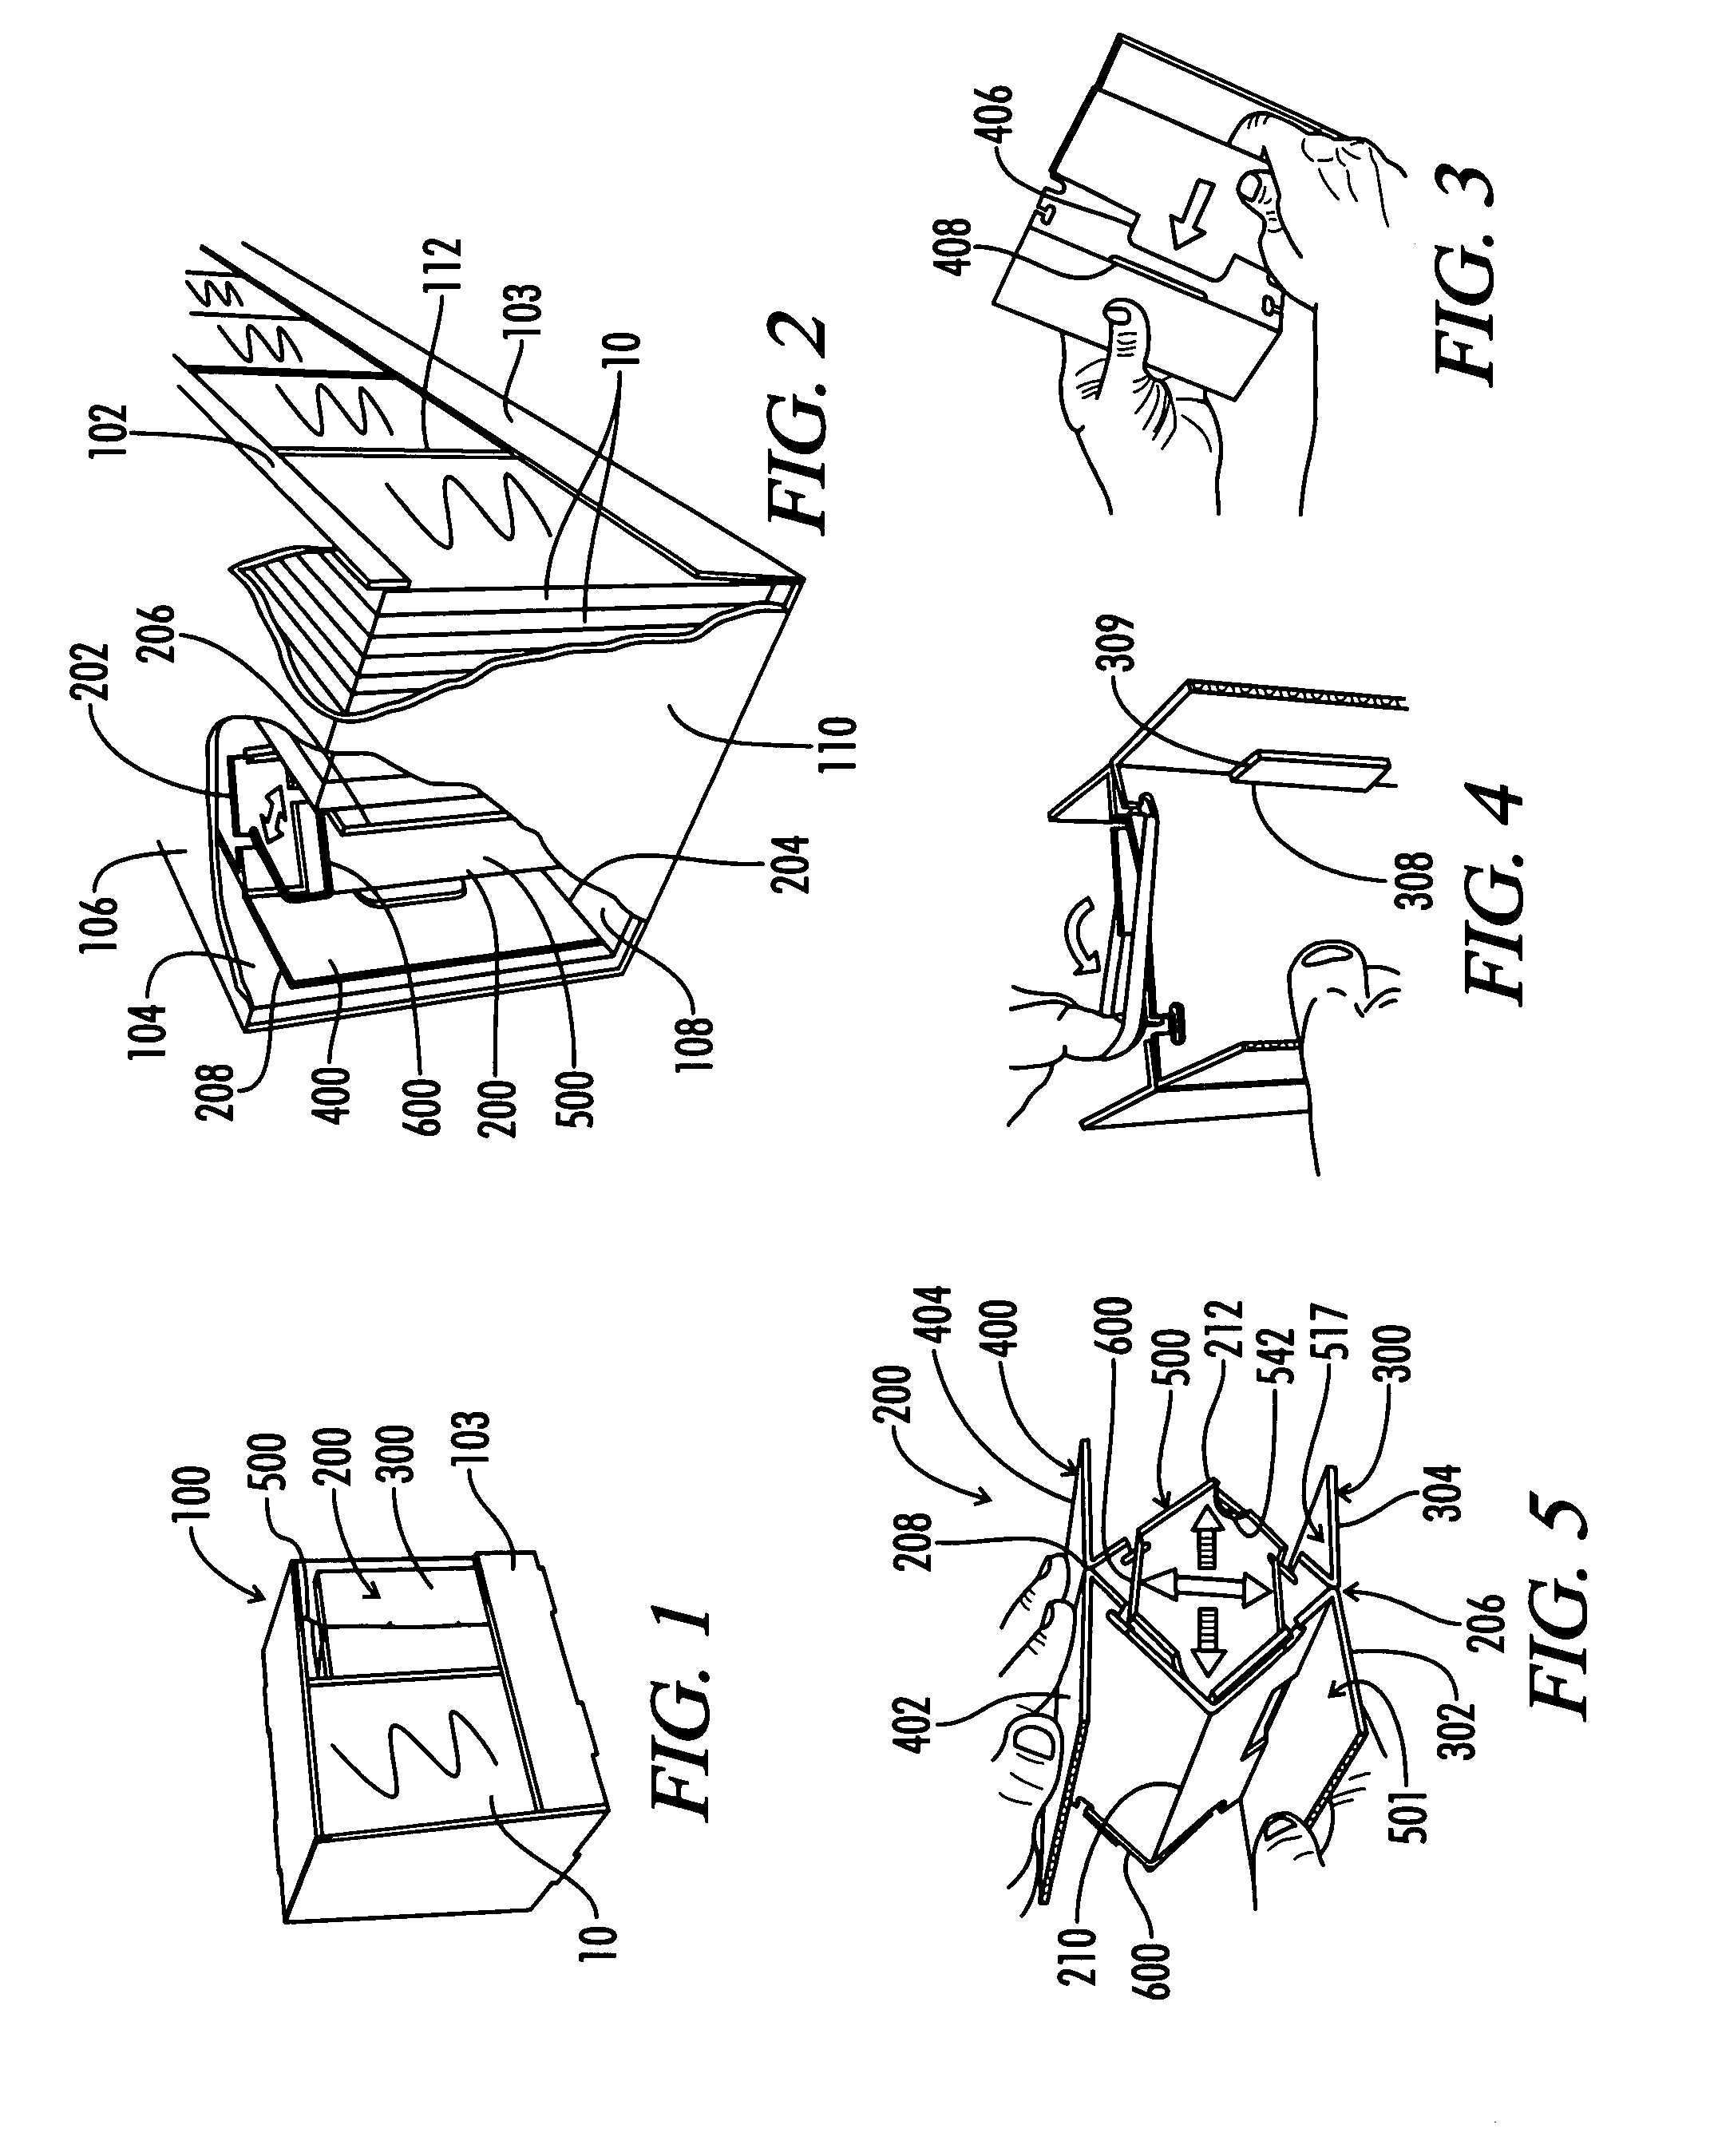 Compactable product pusher system and display